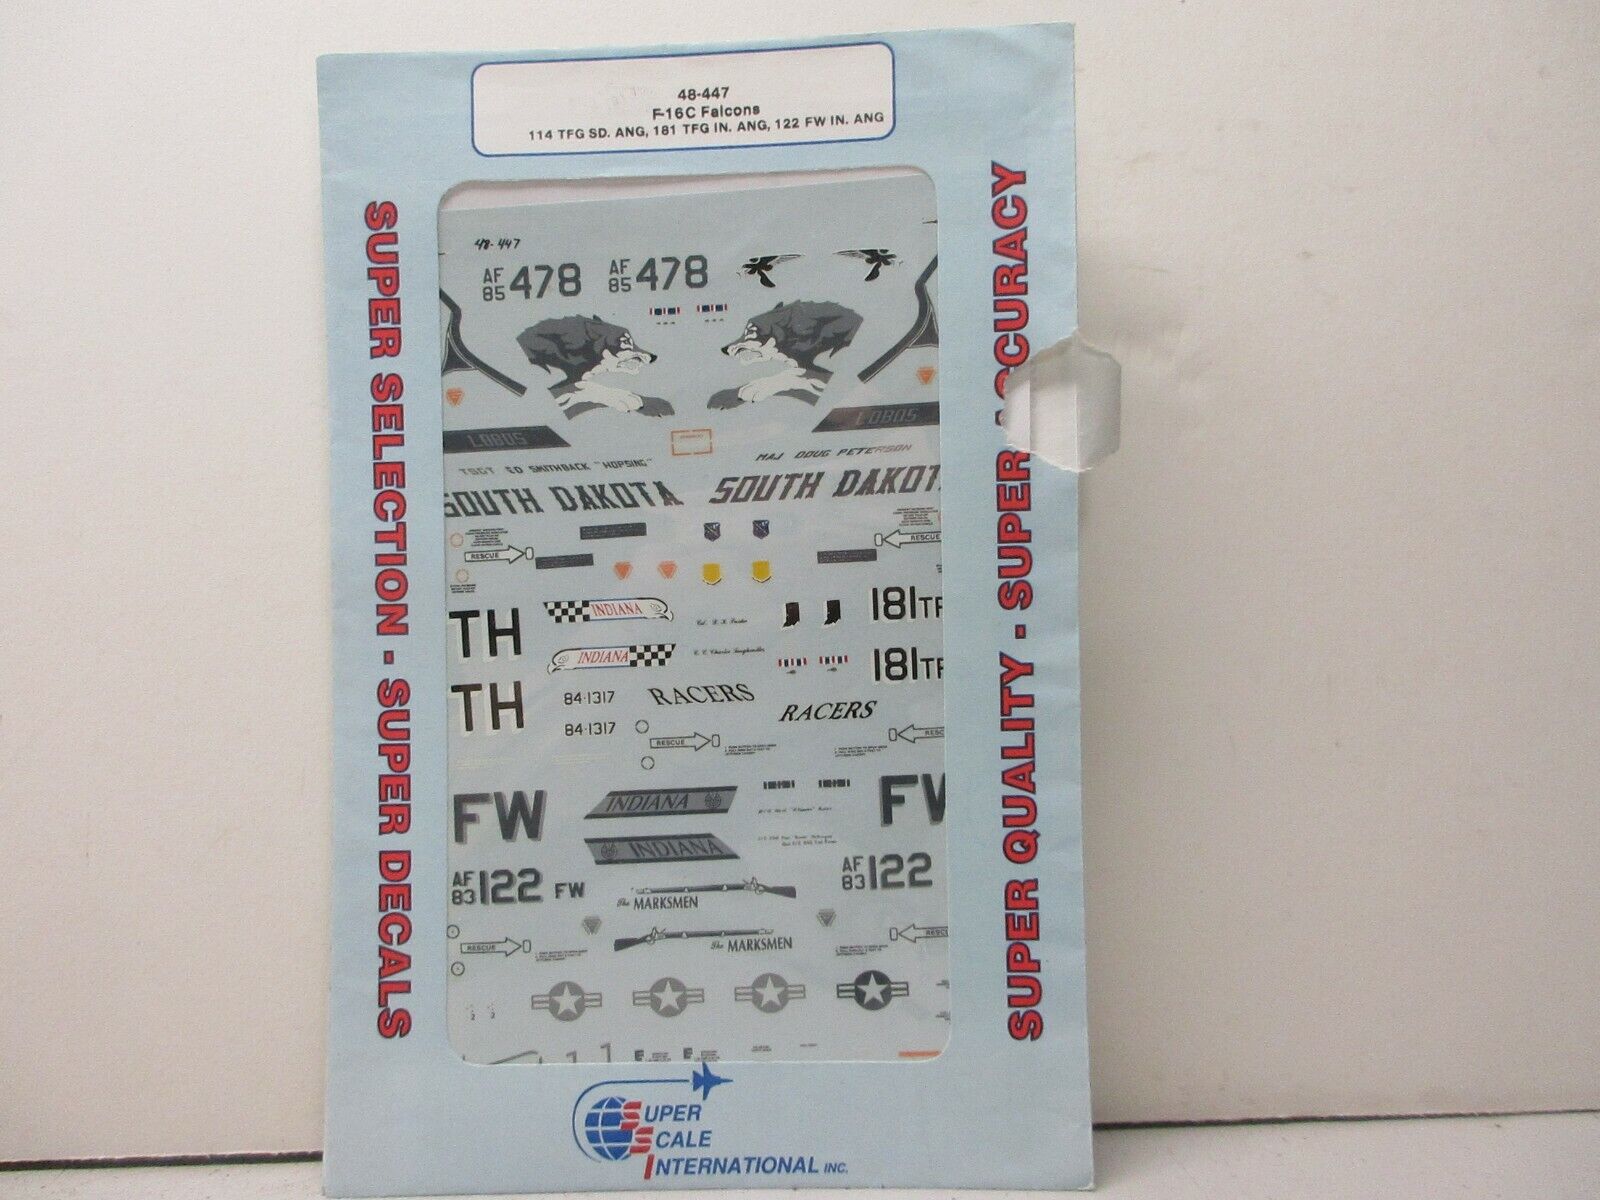 SUPERSCALE 1/48 F-16C FALCONS   #48-447